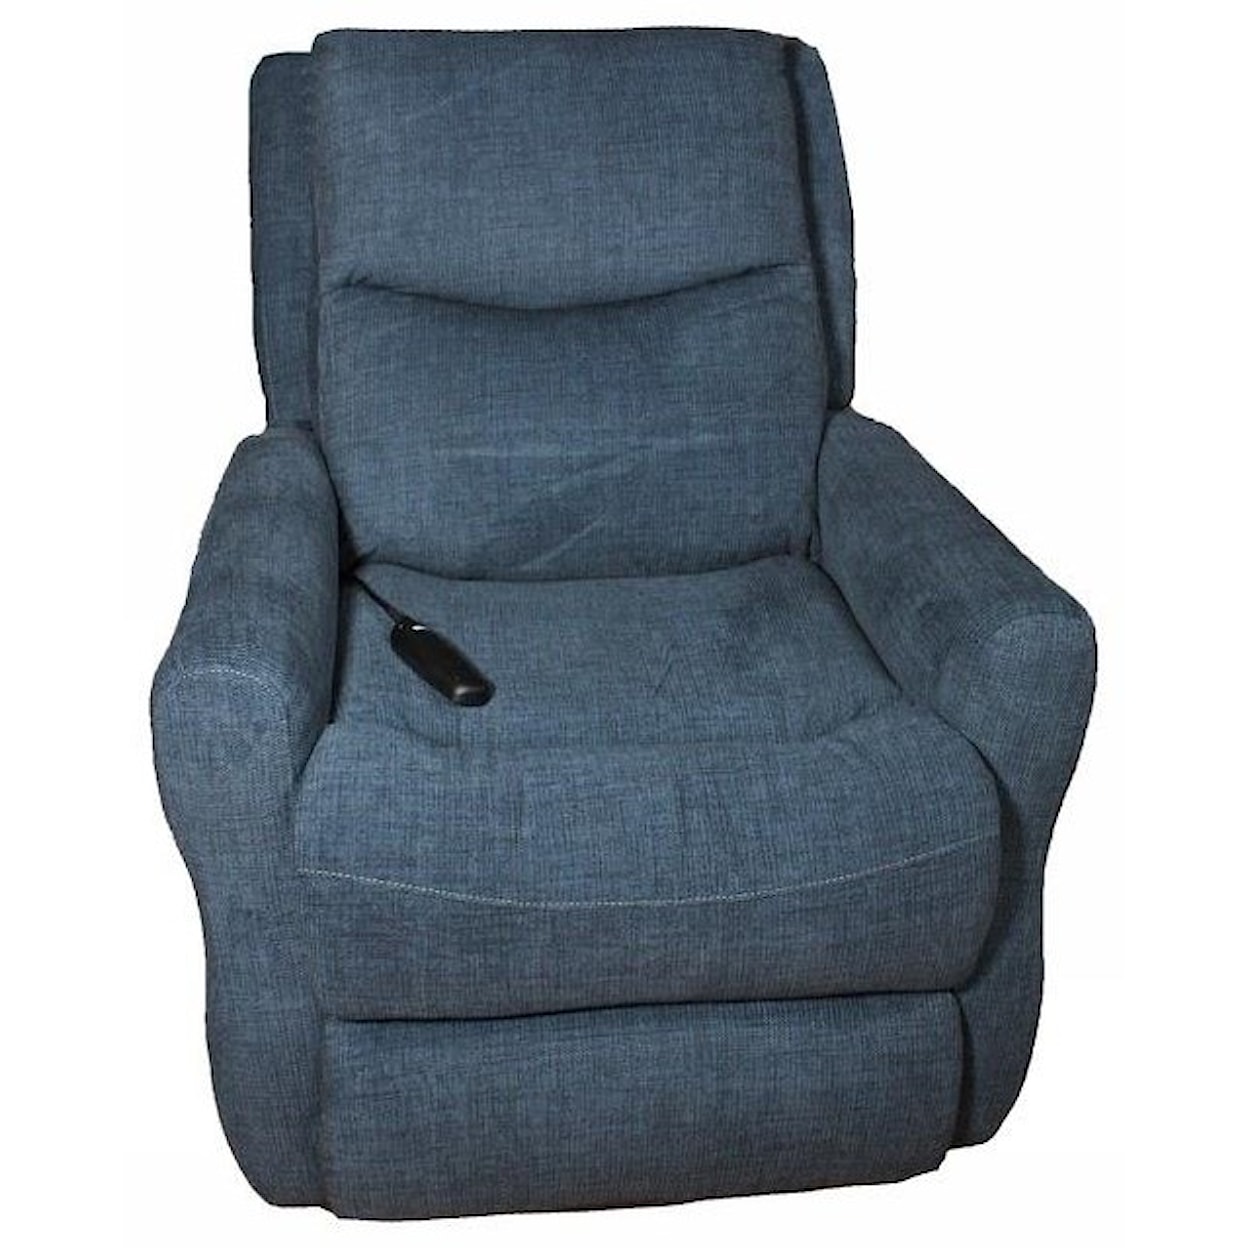 Southern Motion Fame Fame Layflat Lift Chair with Power Headrest